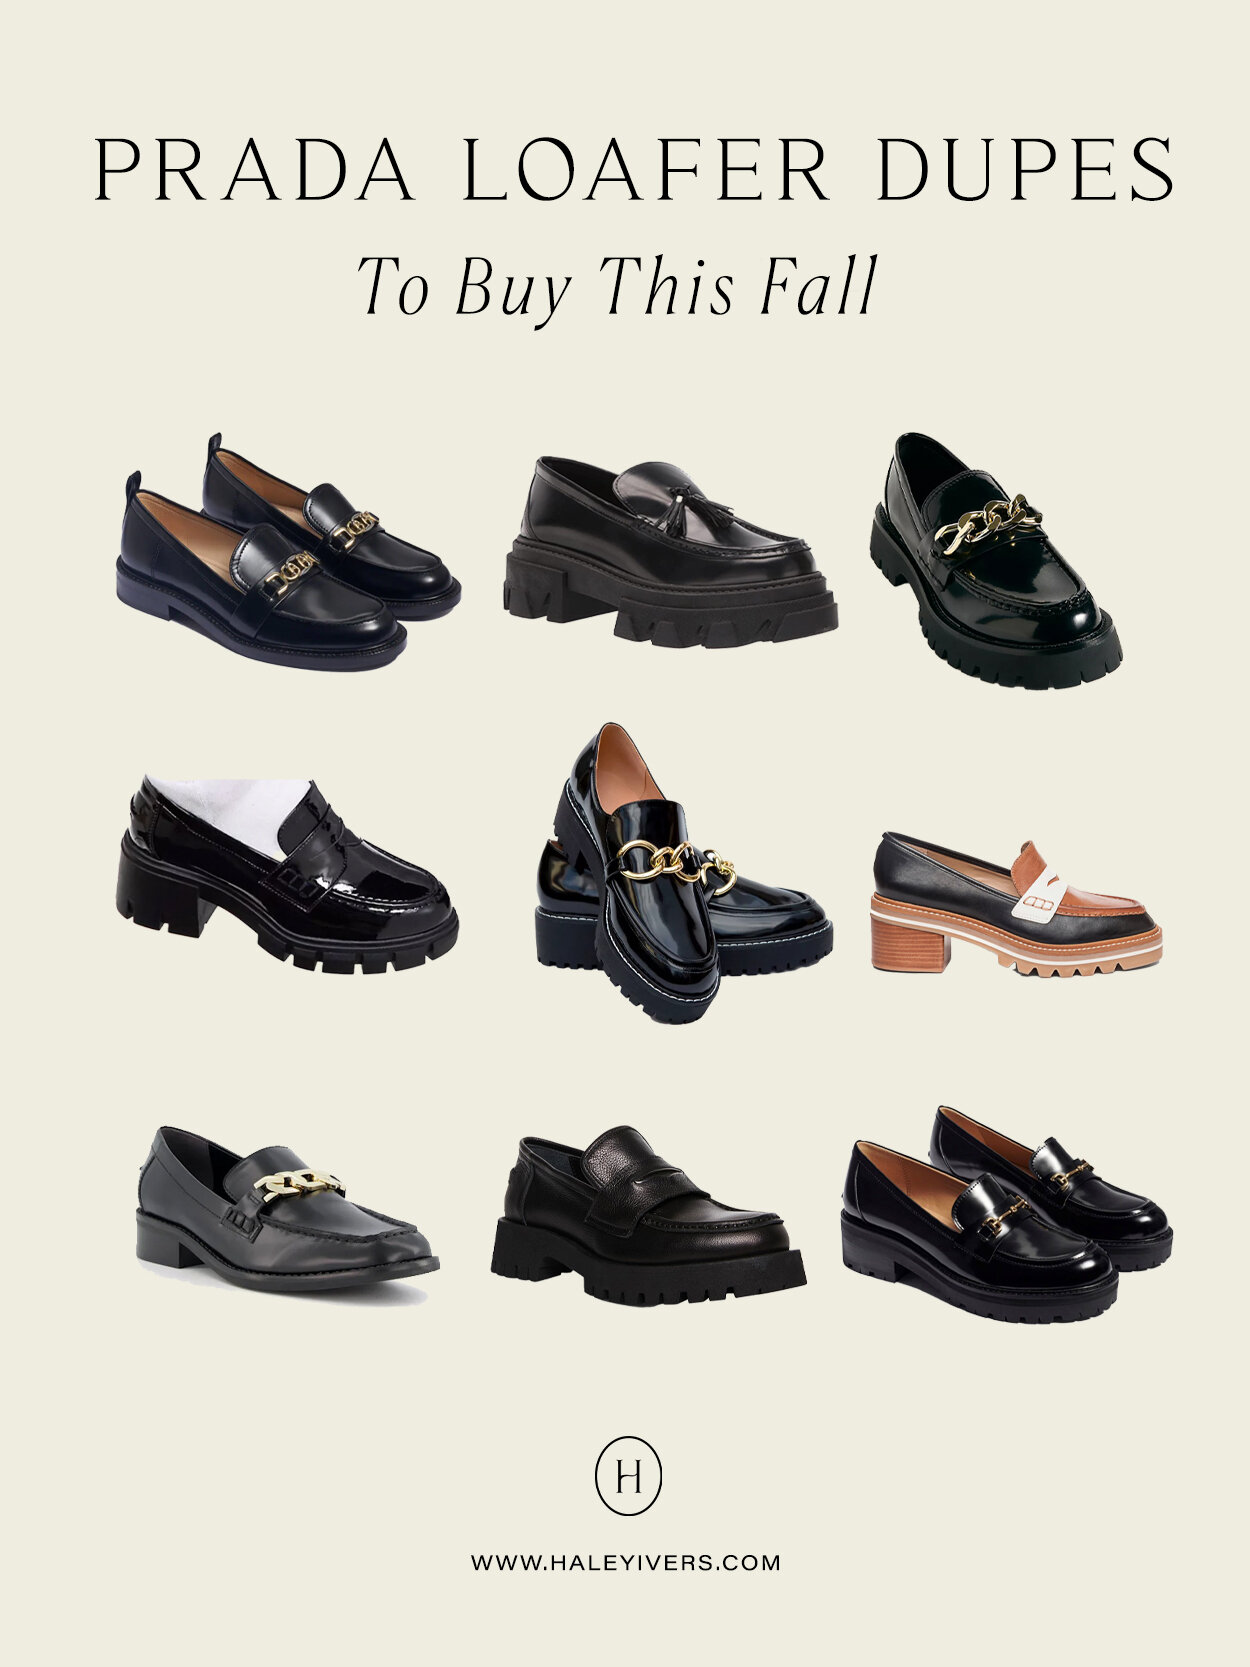 Get the Look for Less: Best Prada Loafer Dupes